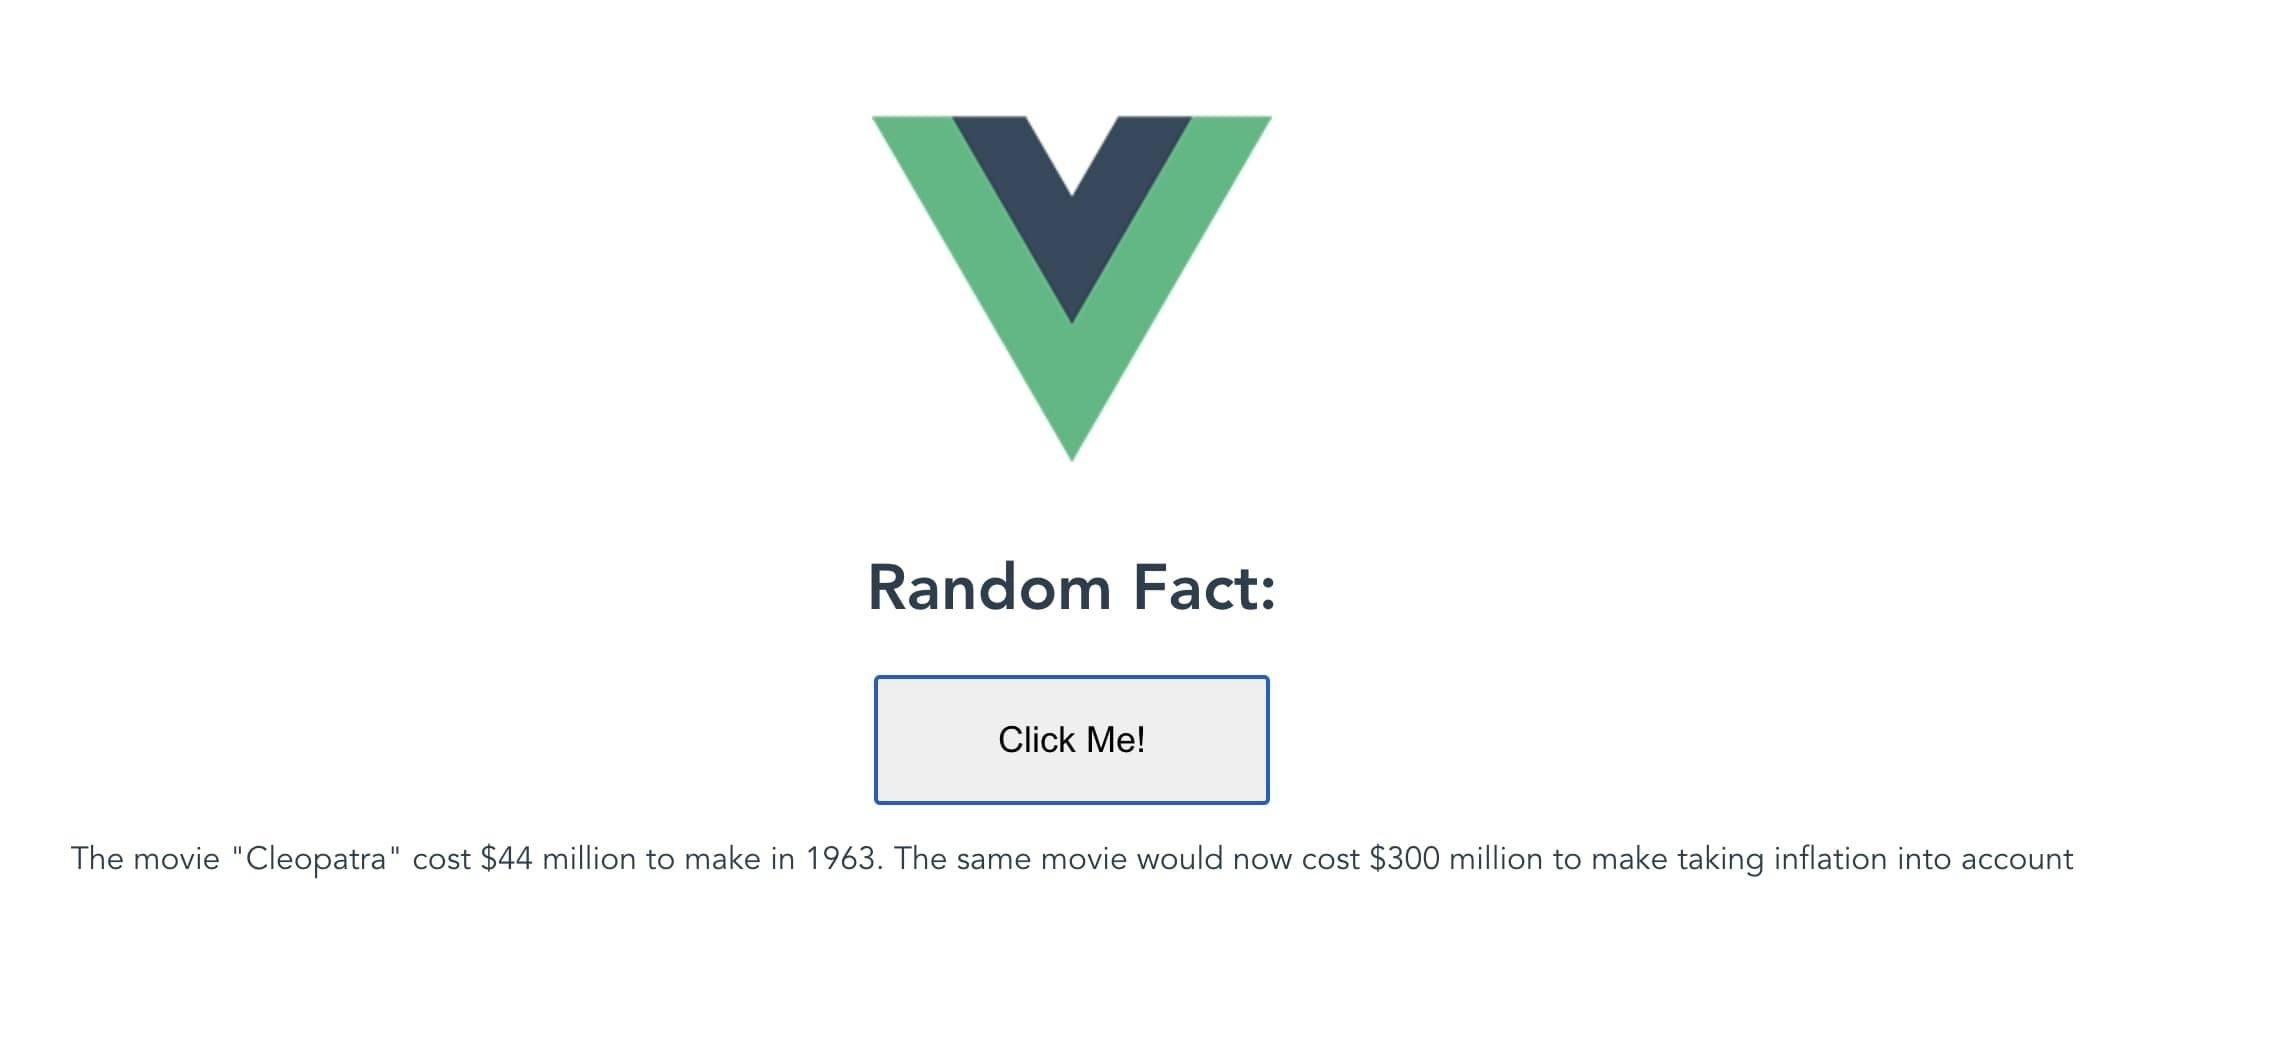 Fetched a Fact from the Fact API using fetch in Vue